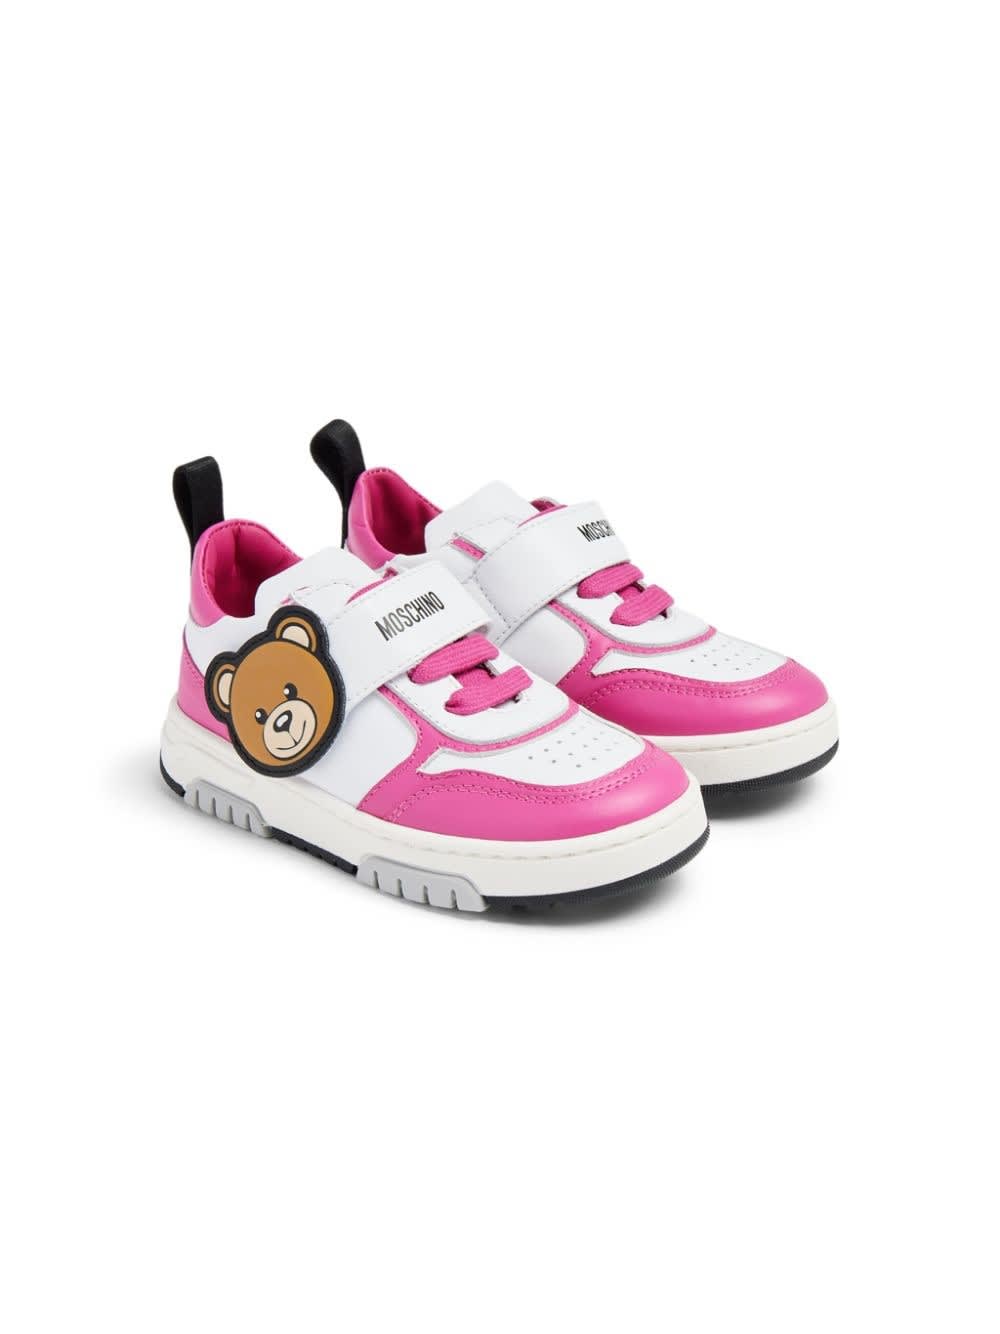 Moschino Kids' Teddy Bear Sneakers In Pink